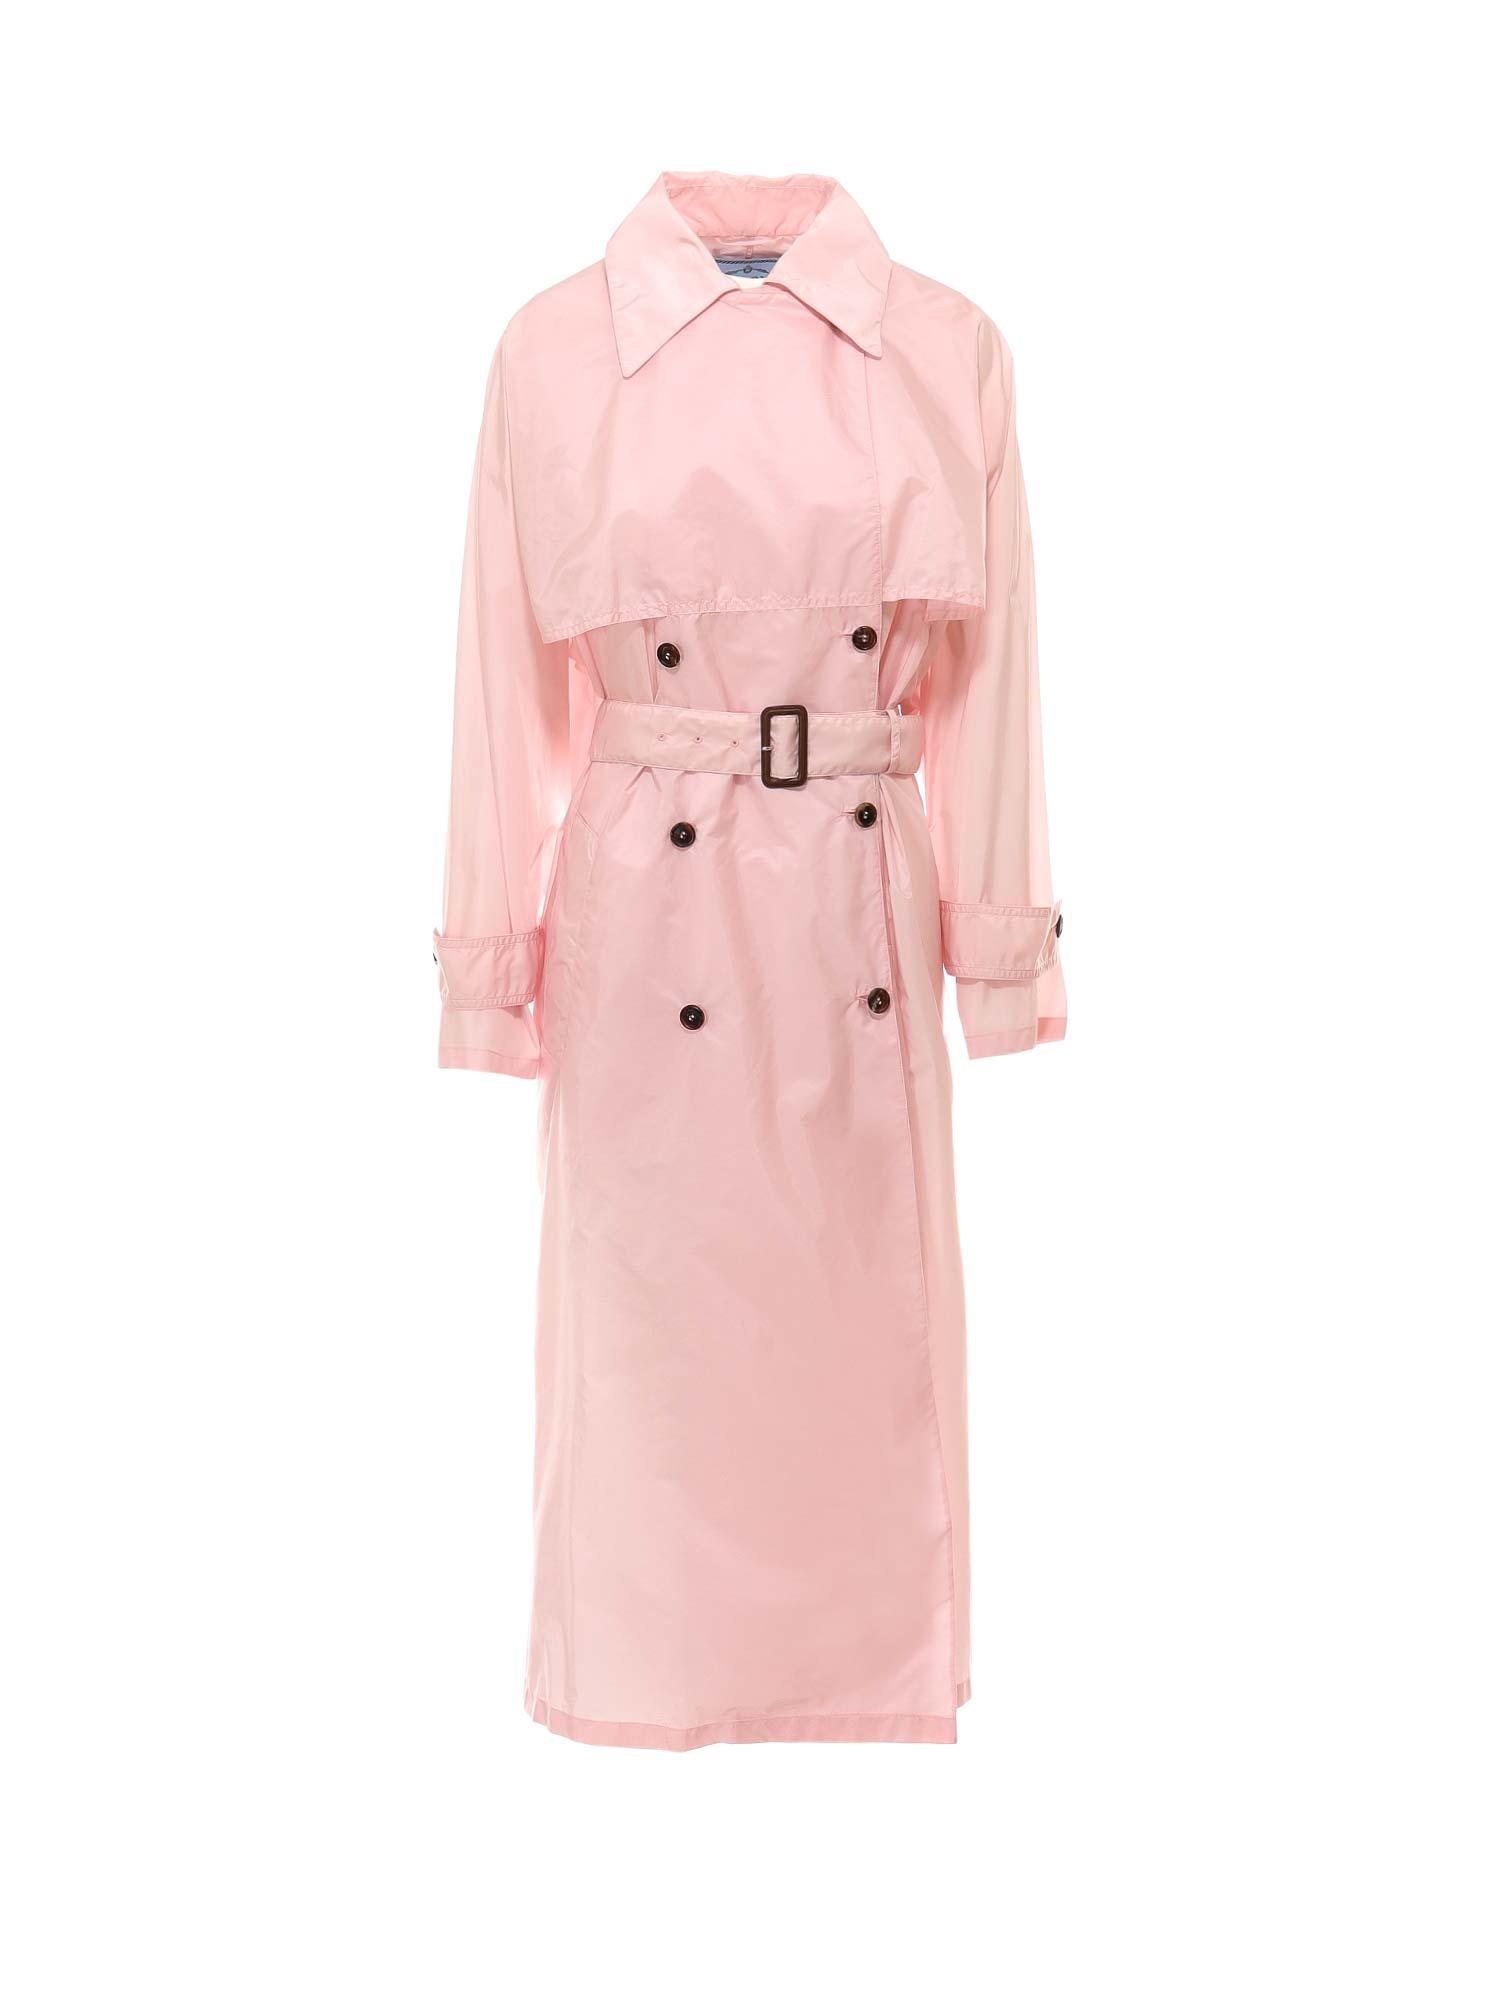 Prada Synthetic Belted Trench Coat in Pink - Lyst